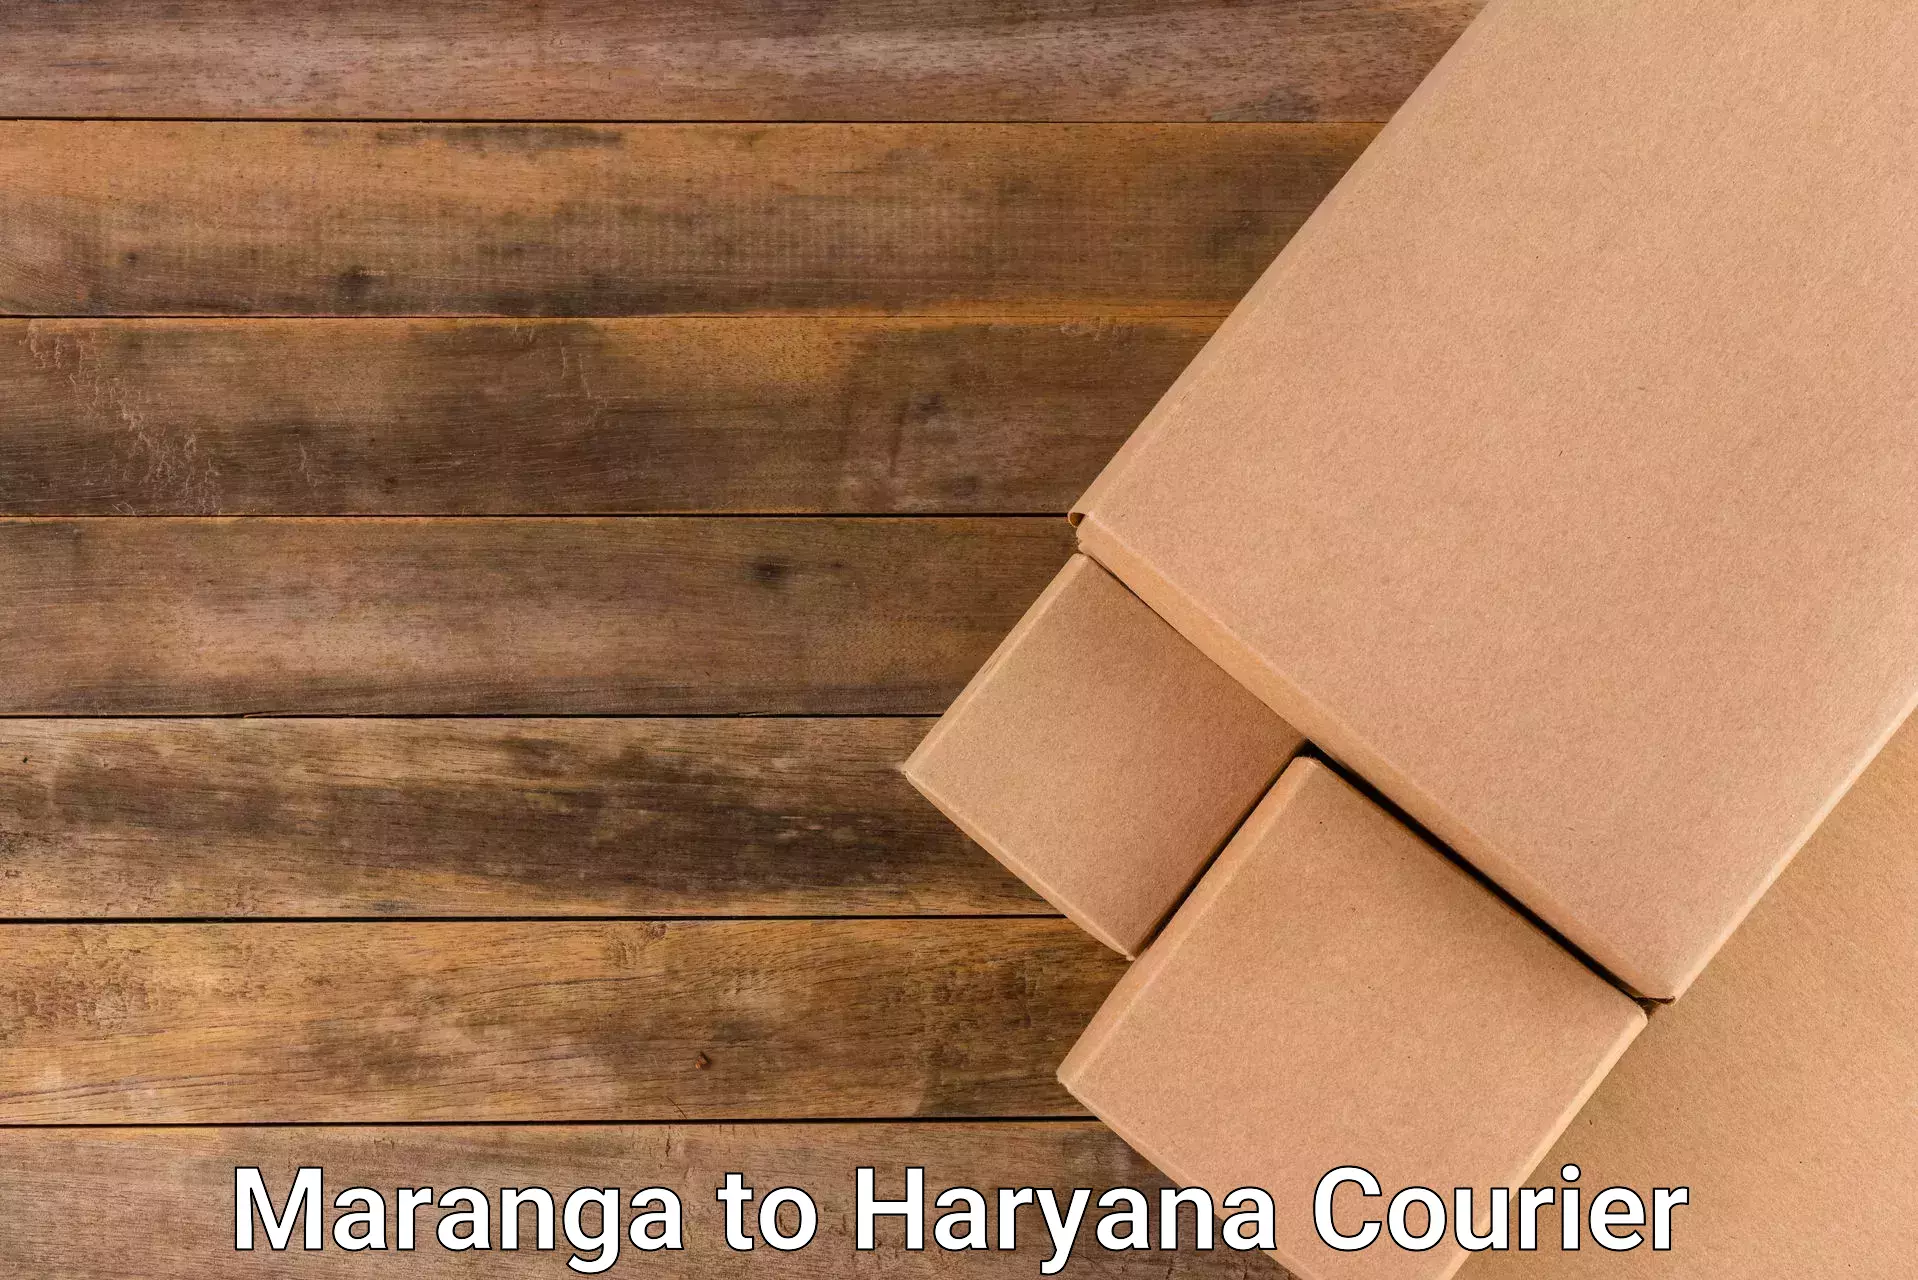 High-quality delivery services in Maranga to NCR Haryana